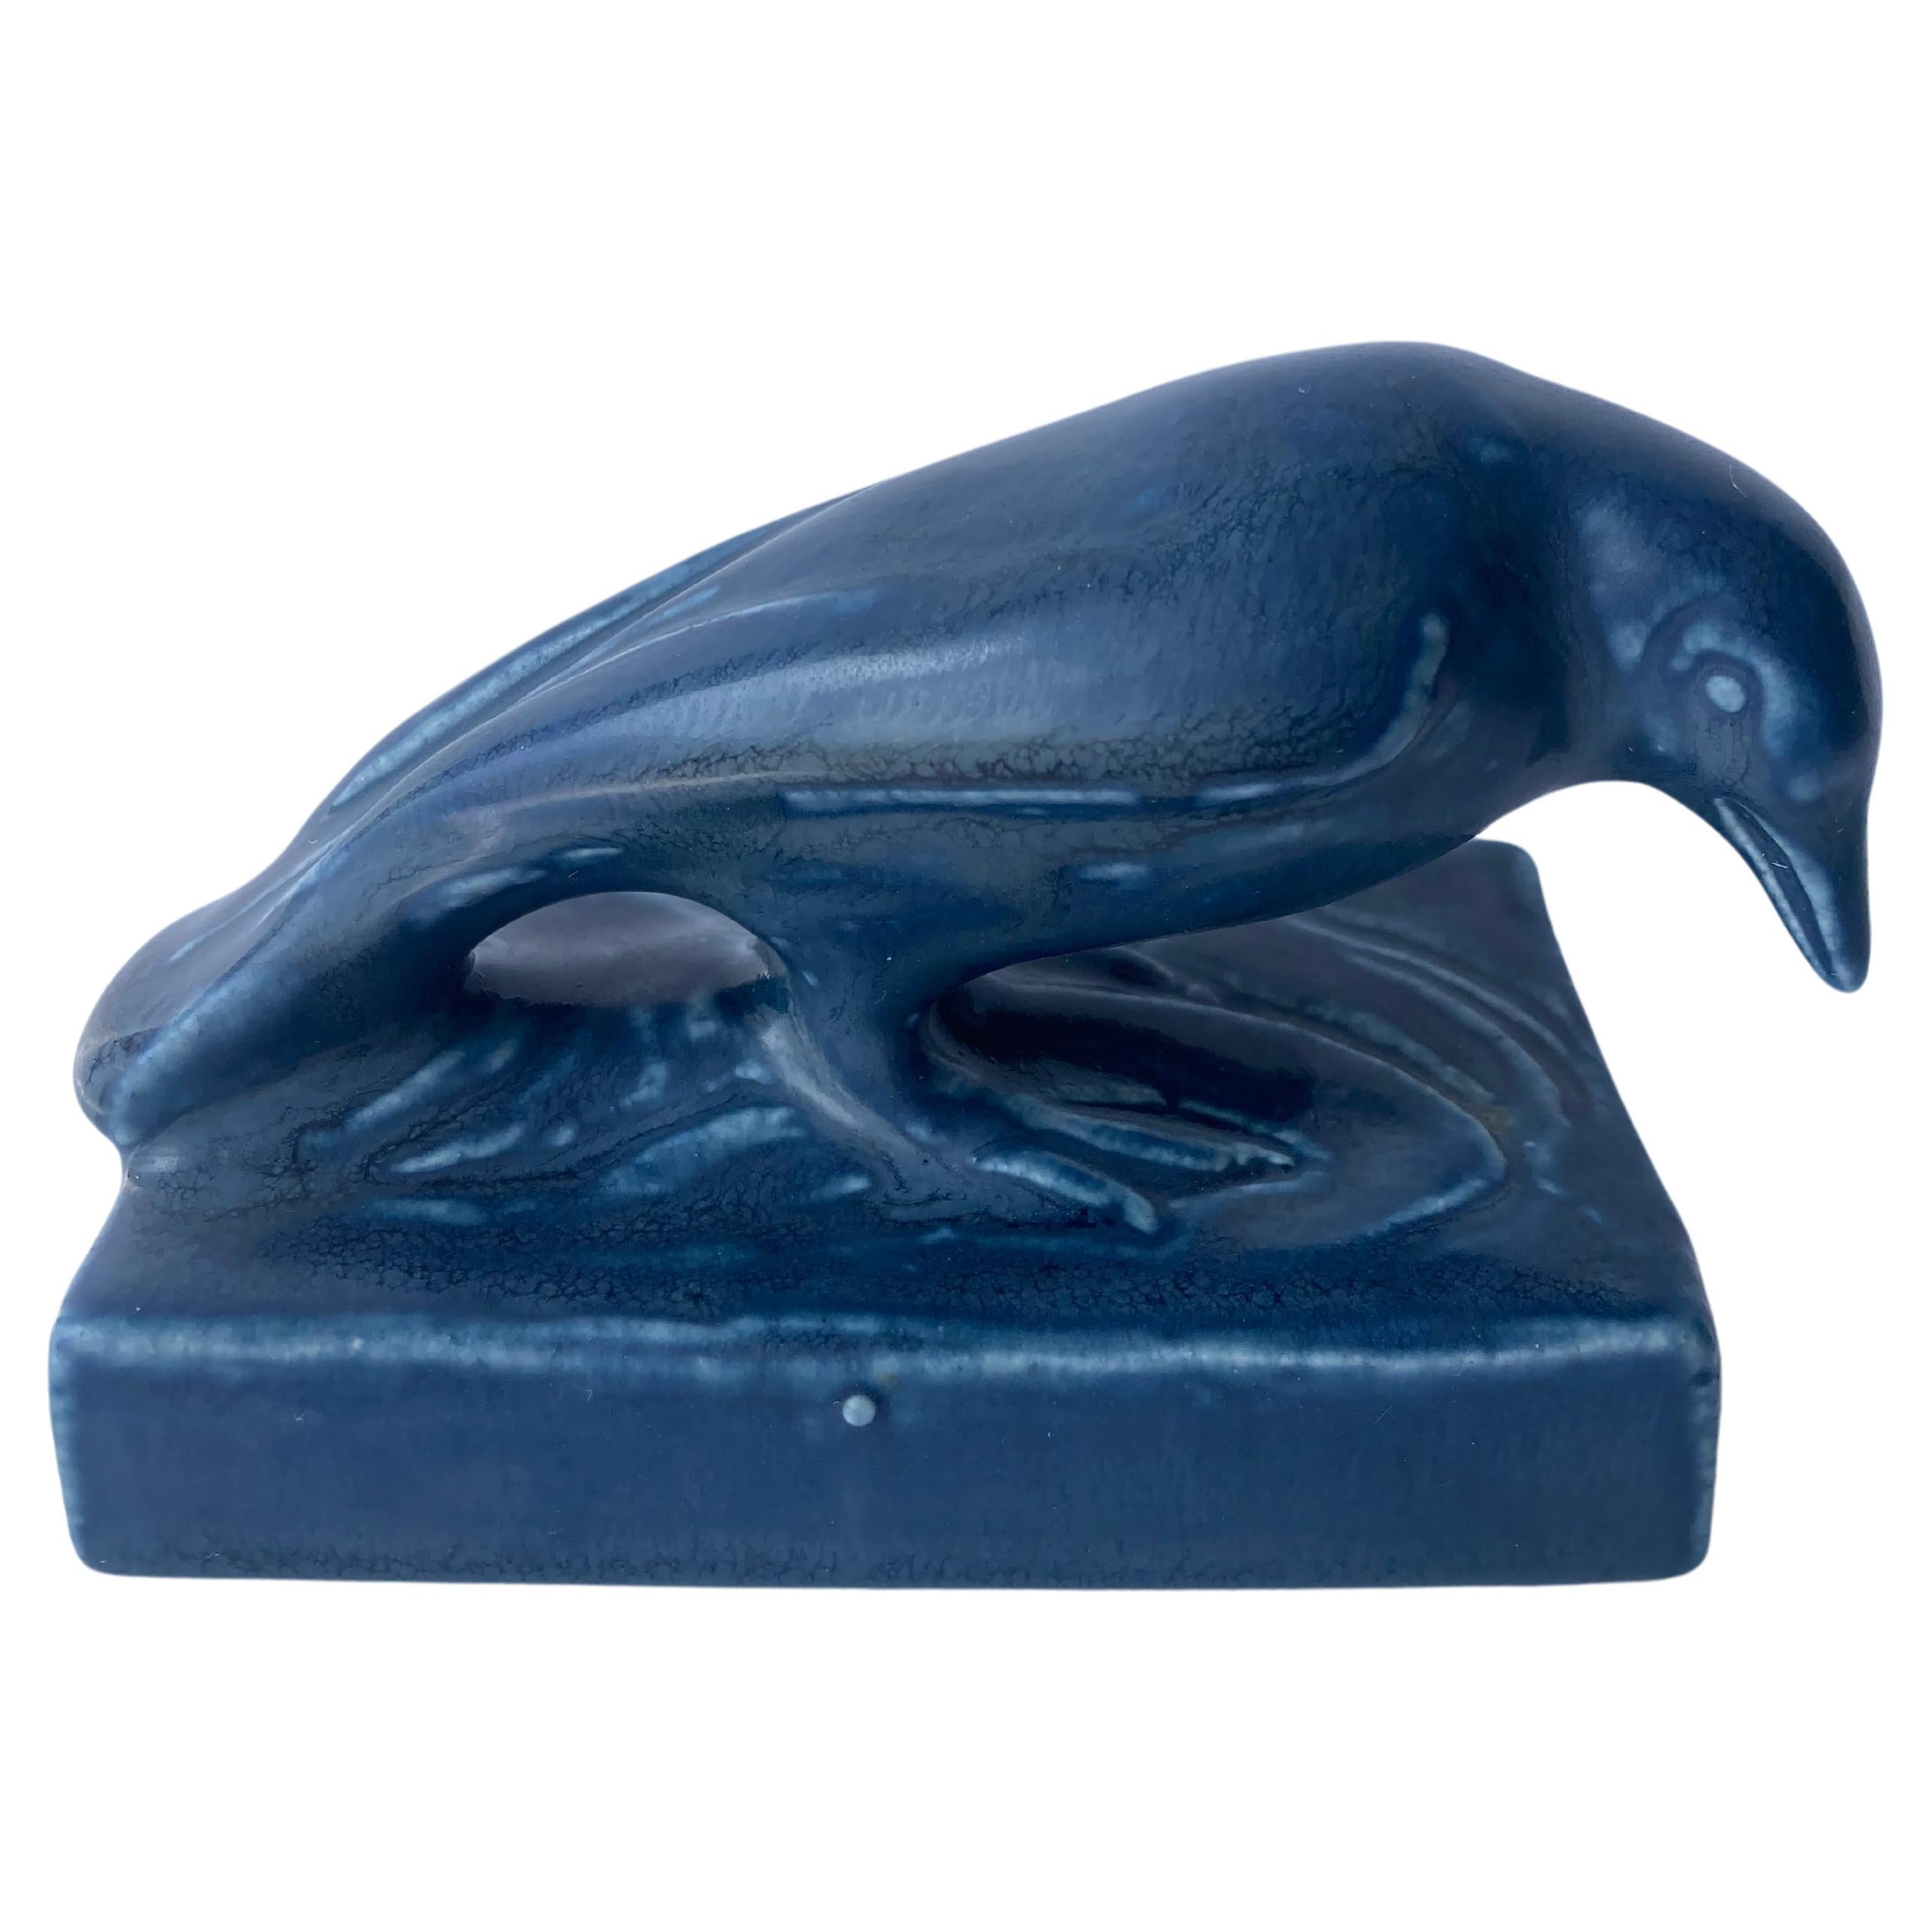 Rookwood Pottery / Ceramic Paperweight, Sculpture, Rook Bird # 1623 For Sale